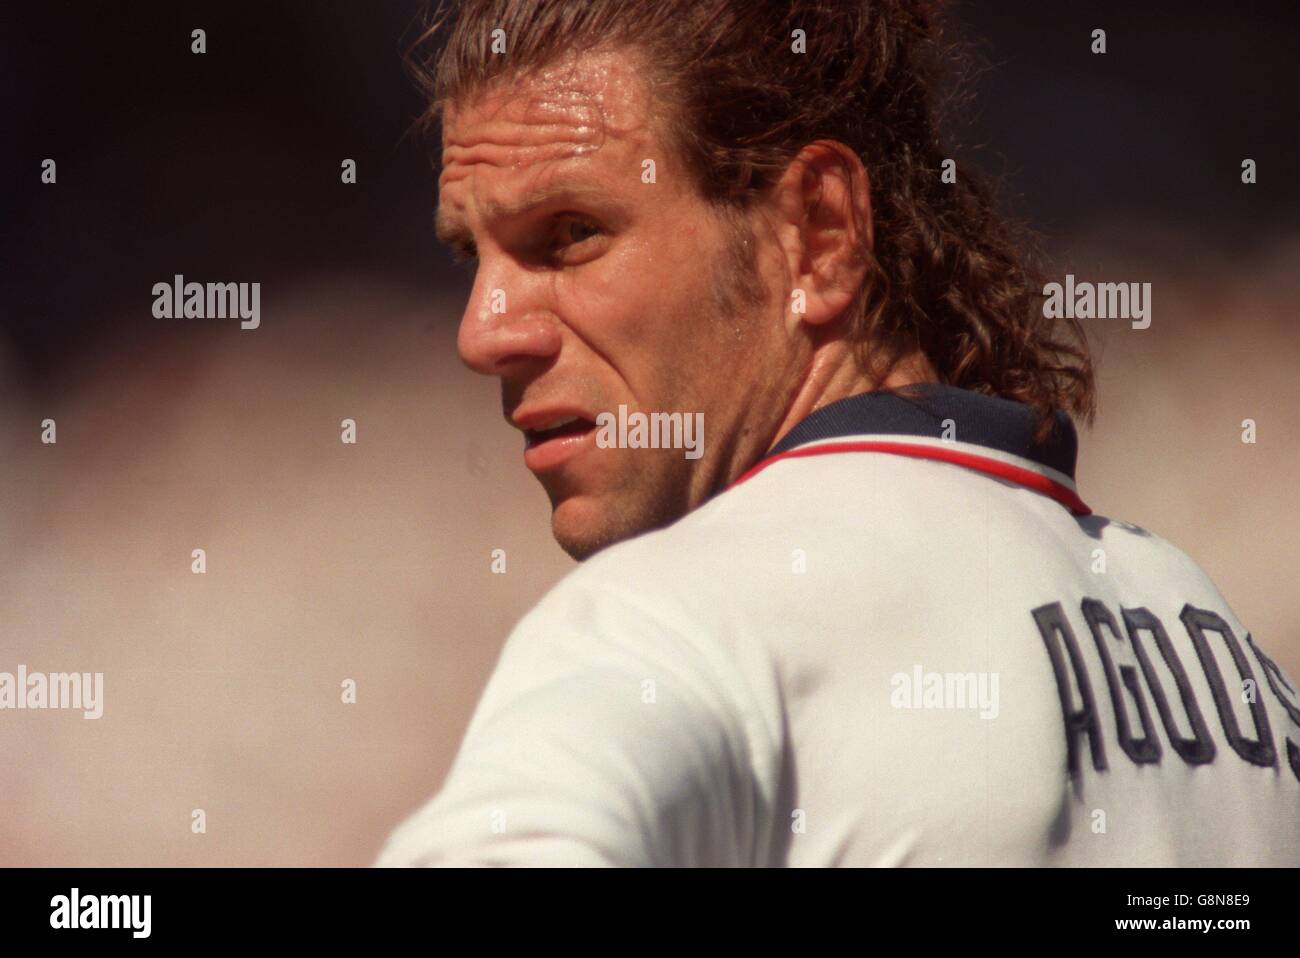 Soccer - World Cup Qualifier - United States of America v Costa Rica. Jeff Agoos, USA Stock Photo